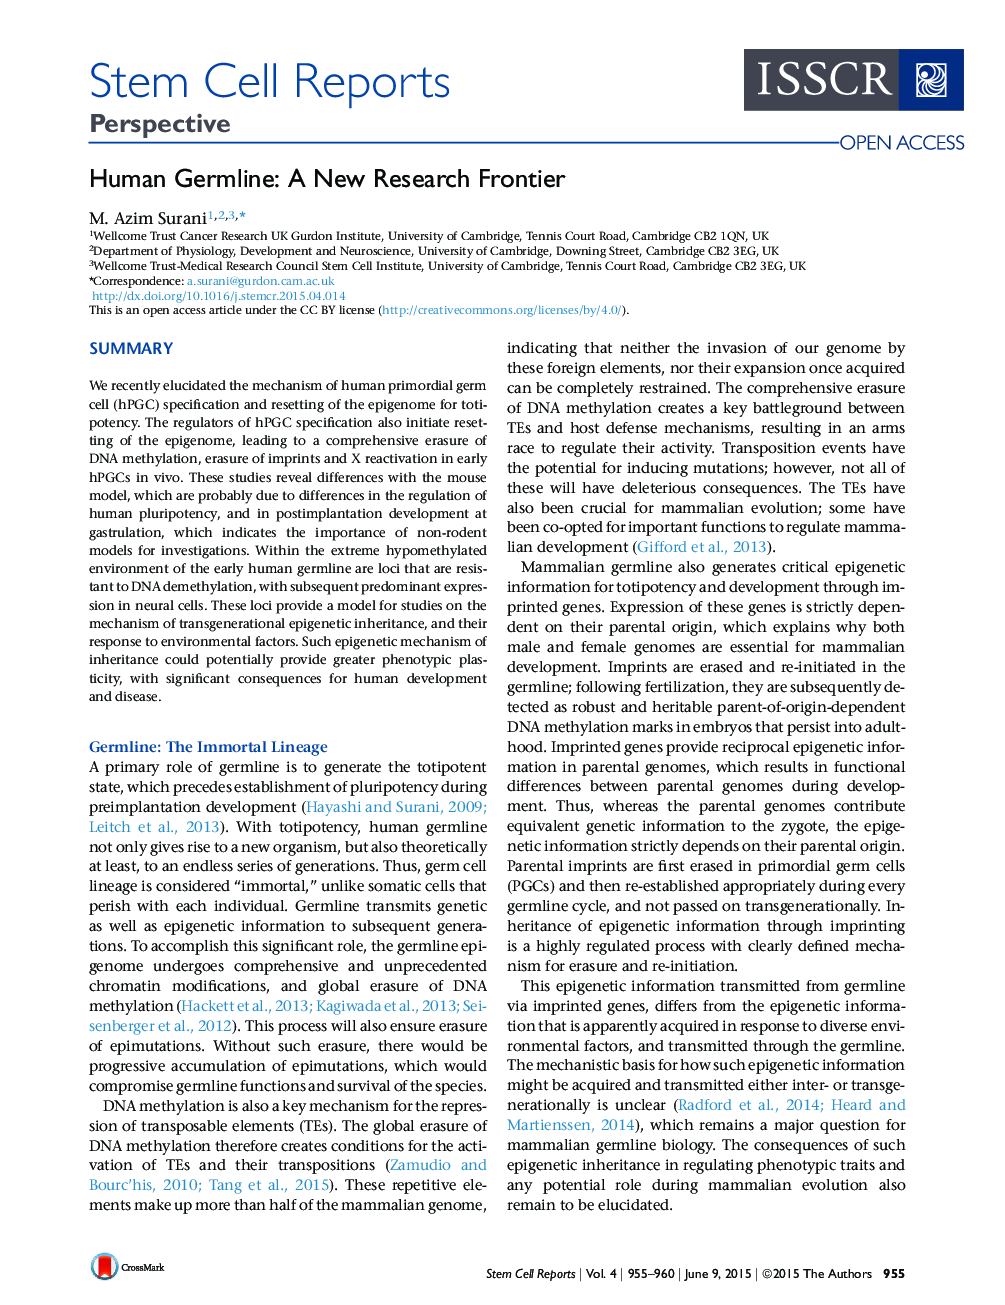 Human Germline: A New Research Frontier 